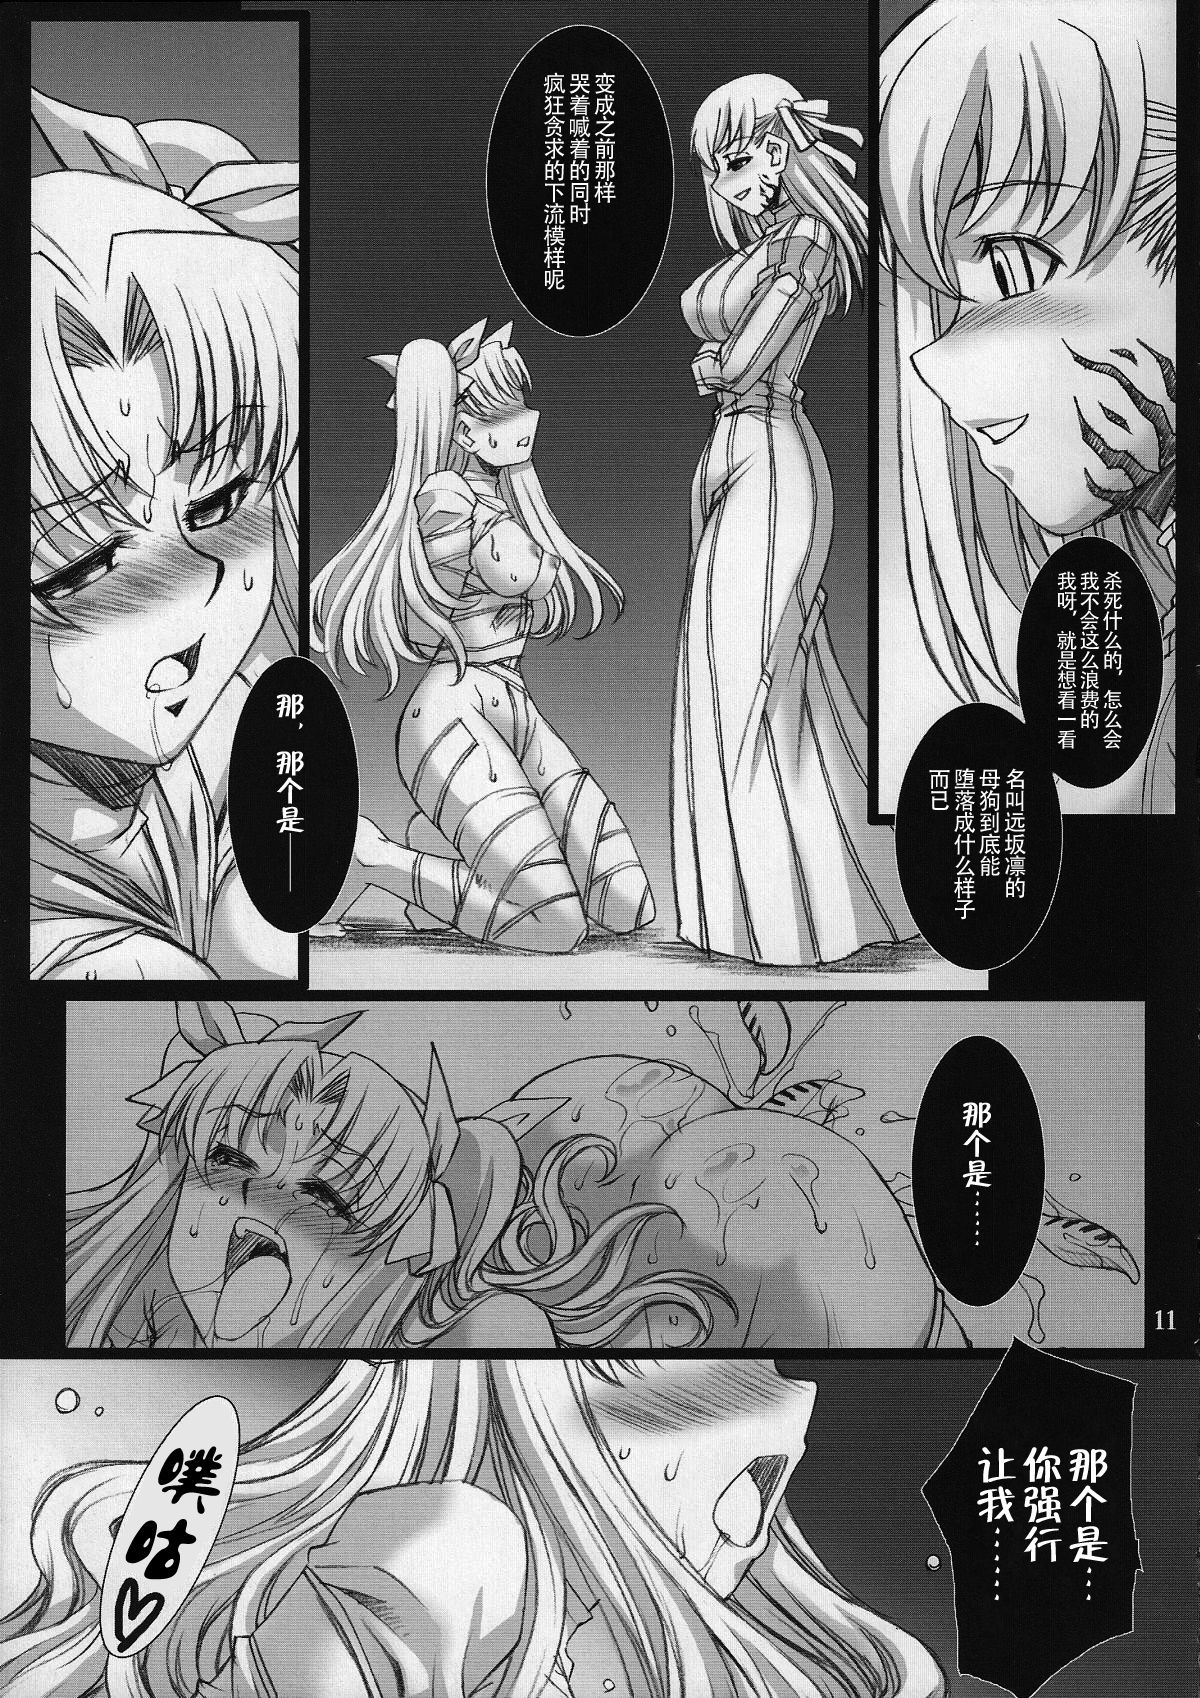 (COMIC1☆2) [H.B (B-RIVER)] Red Degeneration -DAY/3- (Fate/stay night) [Chinese] [不咕鸟汉化组] page 10 full